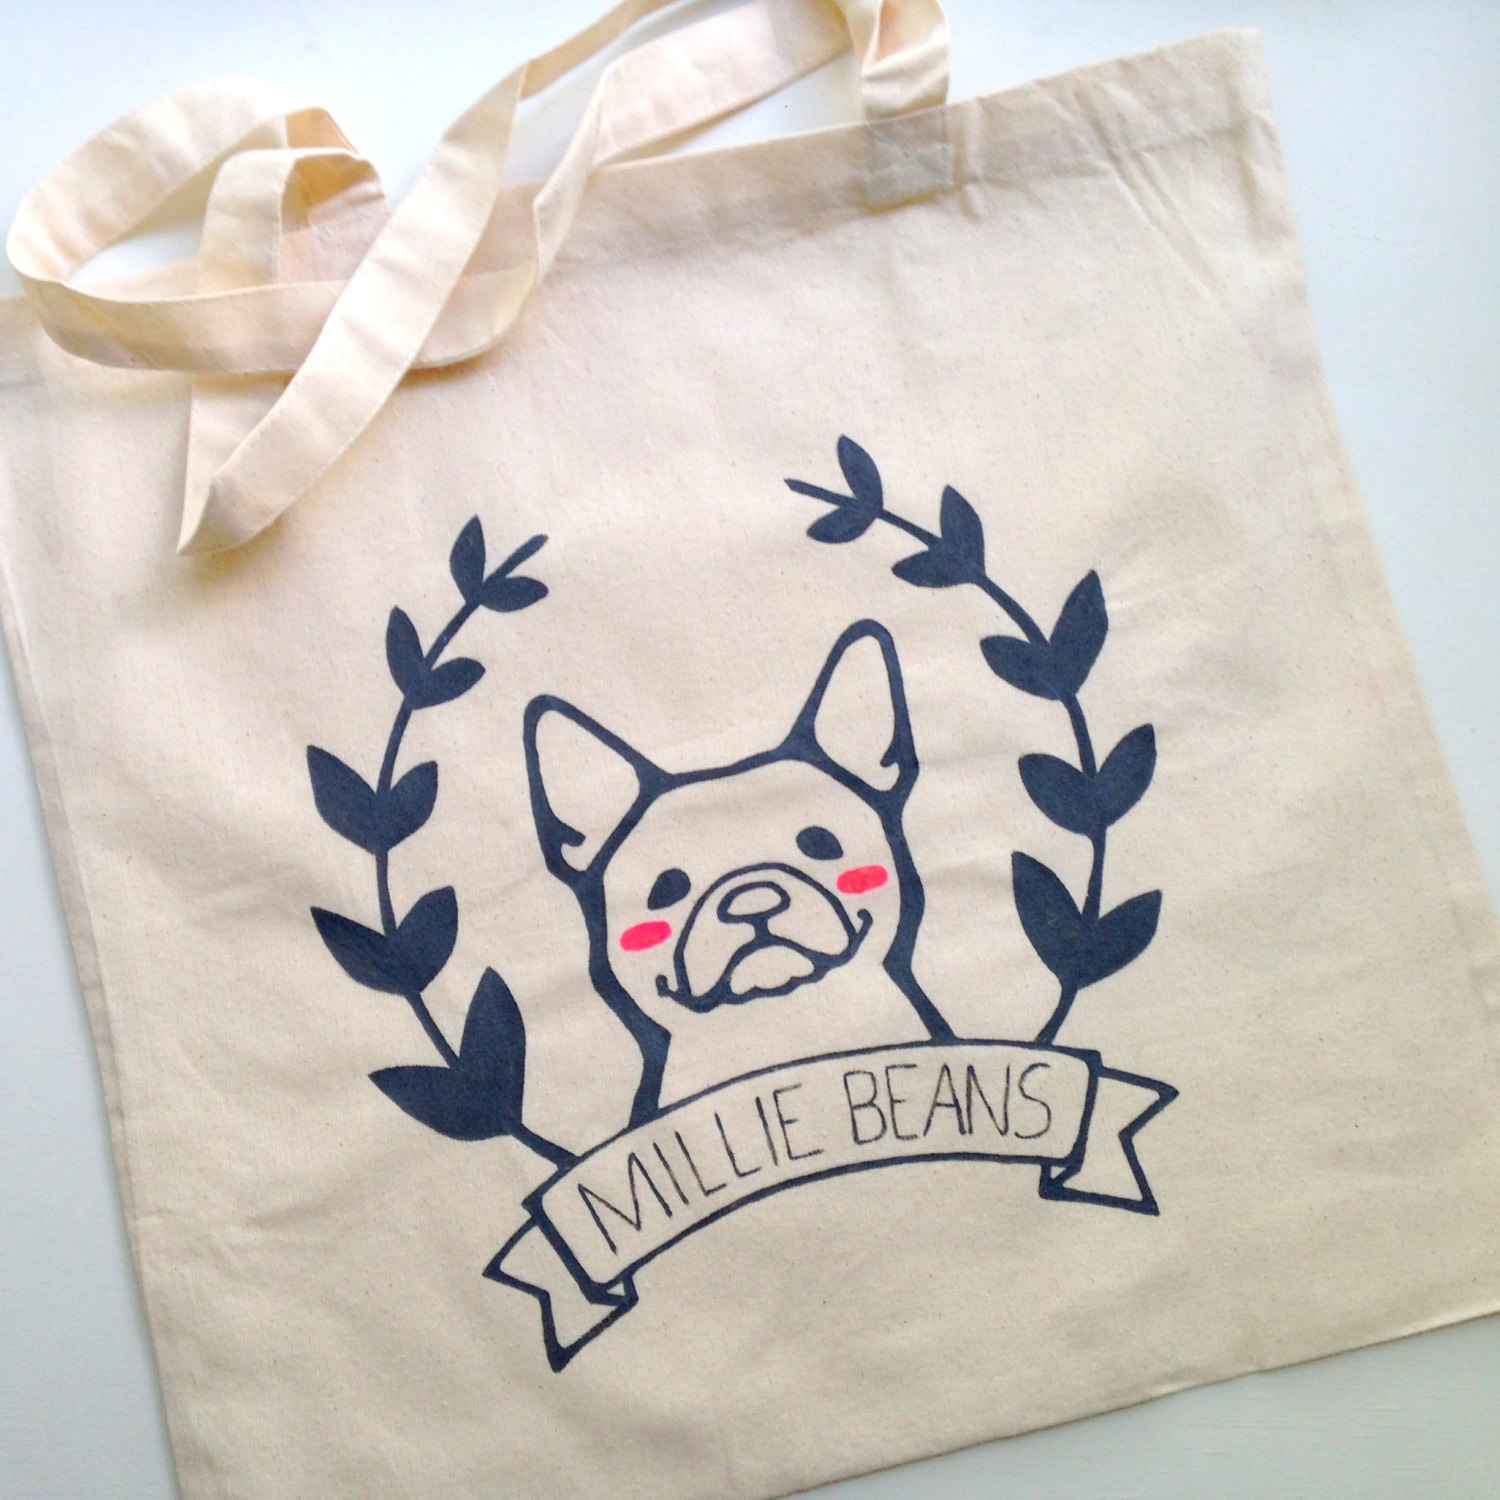 Custom Dog Totes from Hither Rabbit